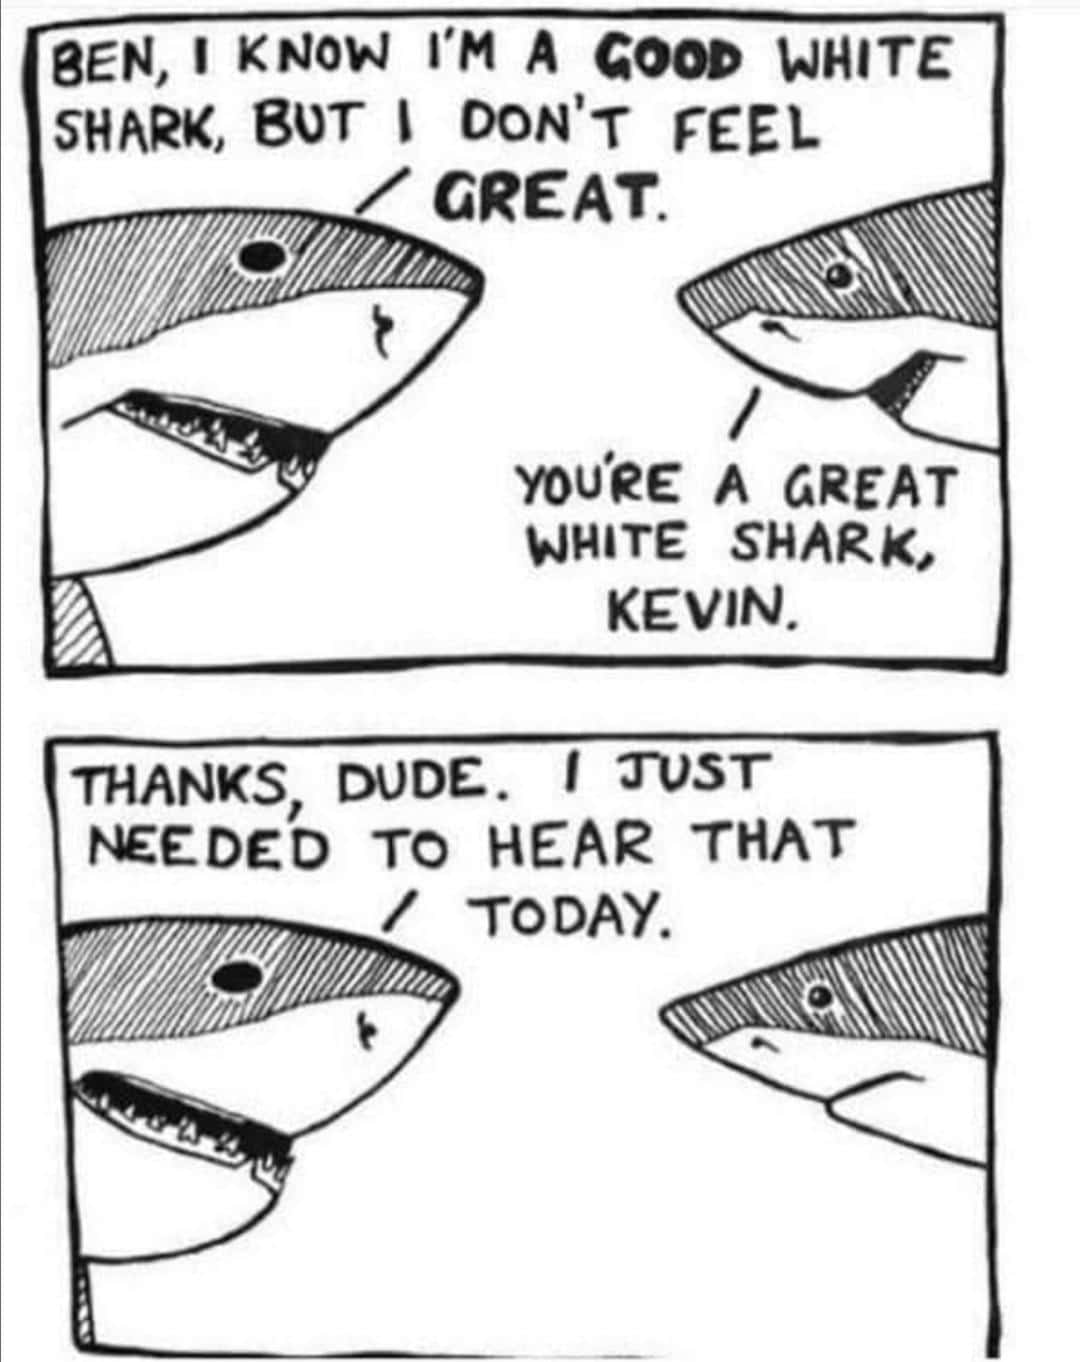 Wholesome memes, Ben Wholesome Memes Wholesome memes, Ben text: BEN, KNOW I'M A GOOD WHITE BUT 1 DON'T FEEL SH ARK, / GREAT. you'ee A GREAT WHITE SHARK, KEVIN. THANKS, DUDE. 1 a-vsr NEEDED To HEAR THAT / T0DAY. 